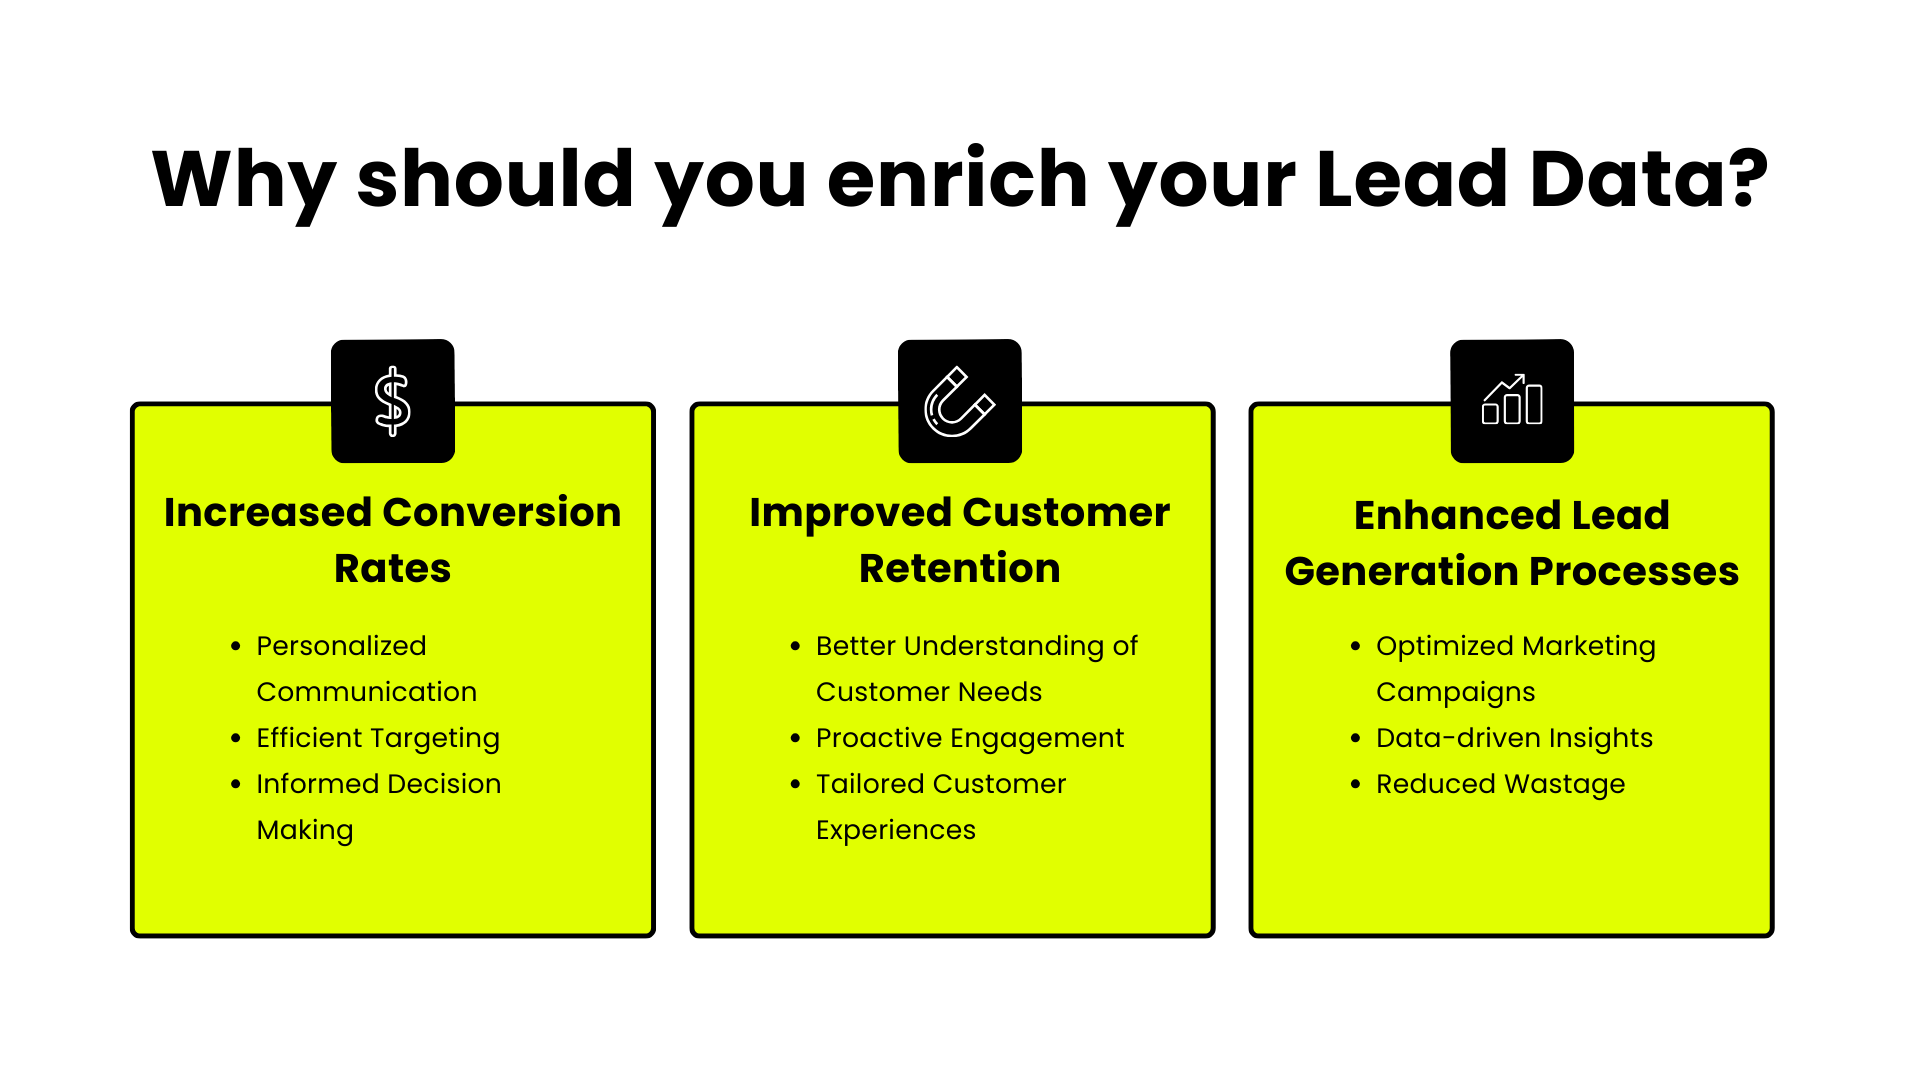 Why should you enrich your Lead Data